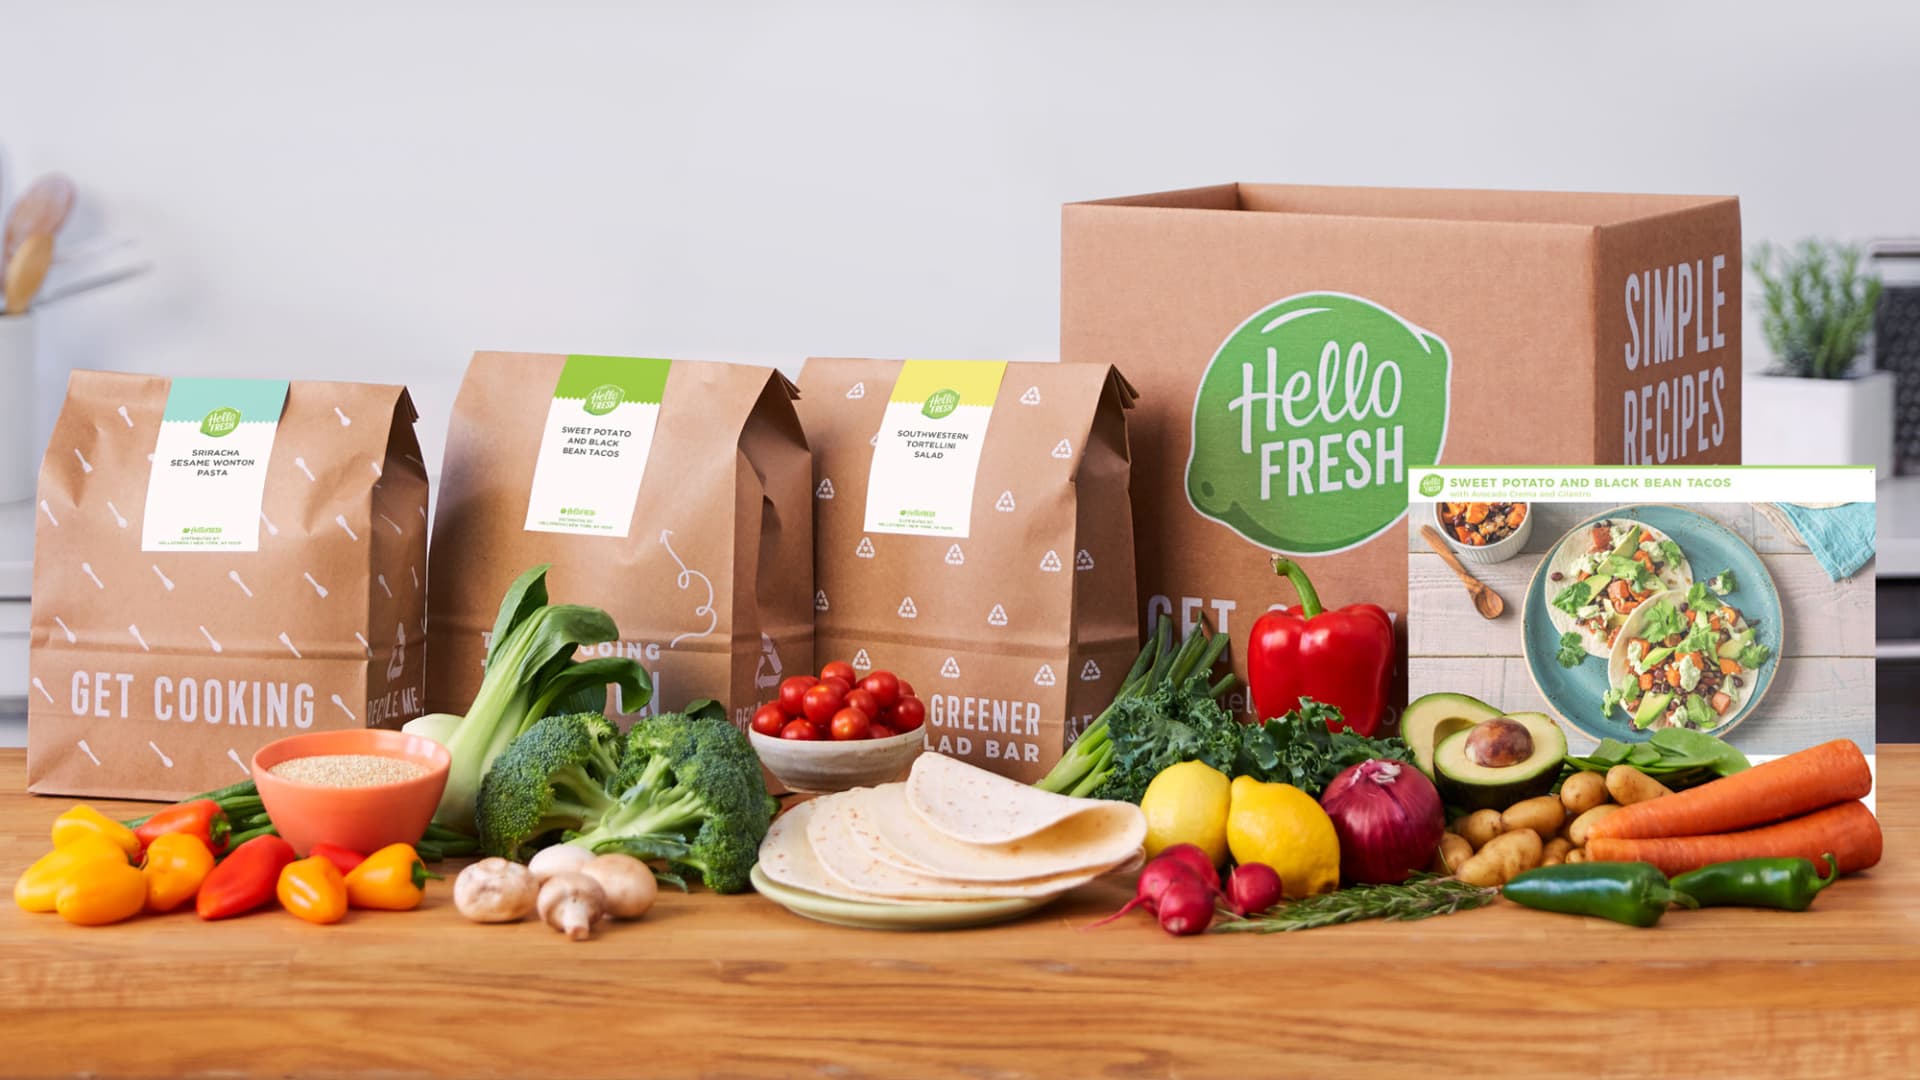 DIY Meal Kits: Cancel Your Meal Delivery Subscription - Blake Hill House